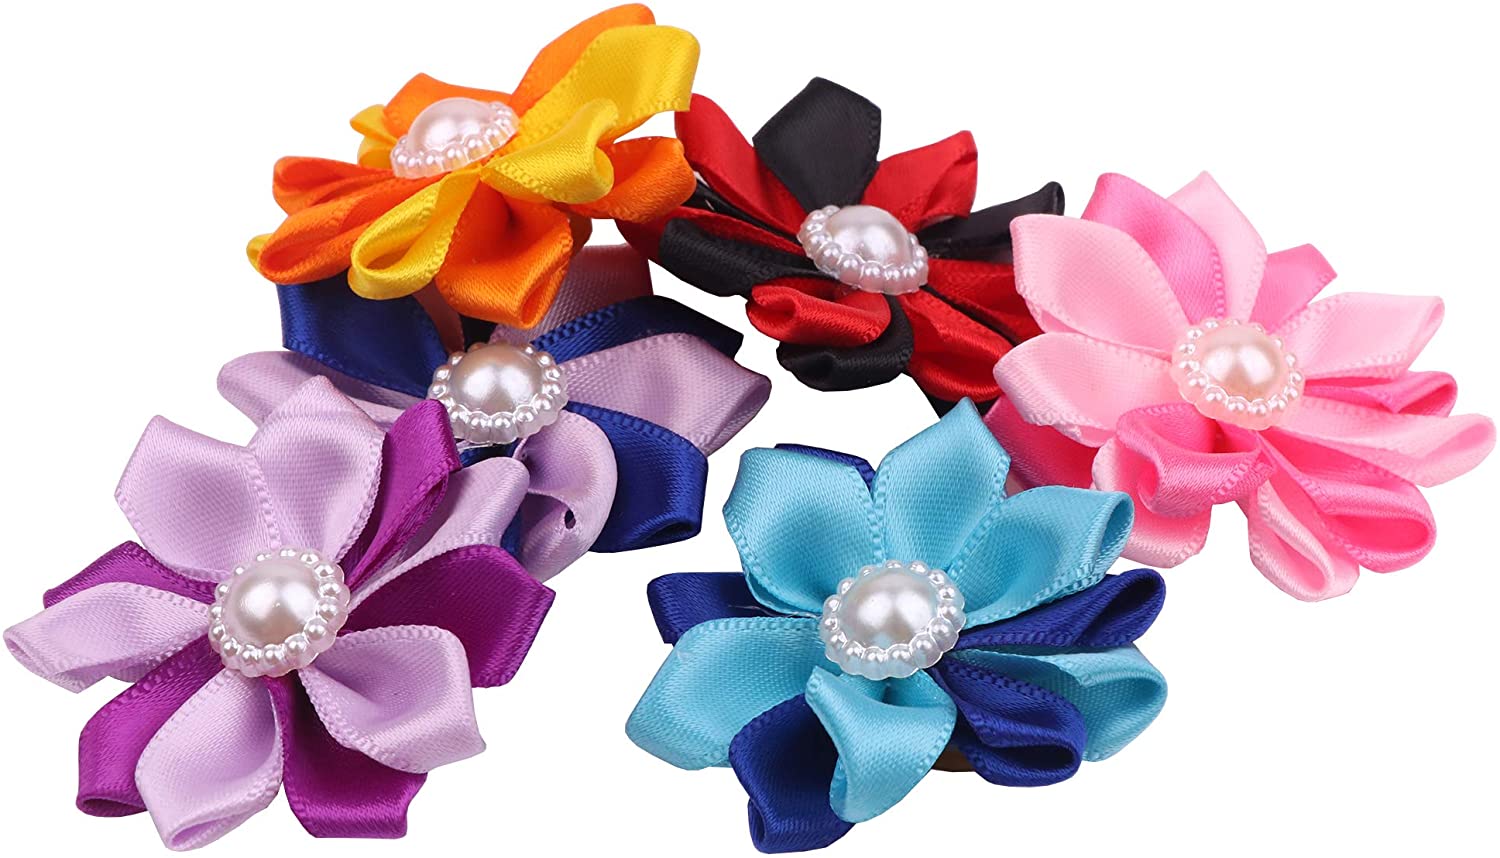 Hot Cute Small Dog Hair Bows Topknot Small Bowknot with Rubber Bands Pet Grooming Products Pet Hair Bows Hair Accessories 15 Colors